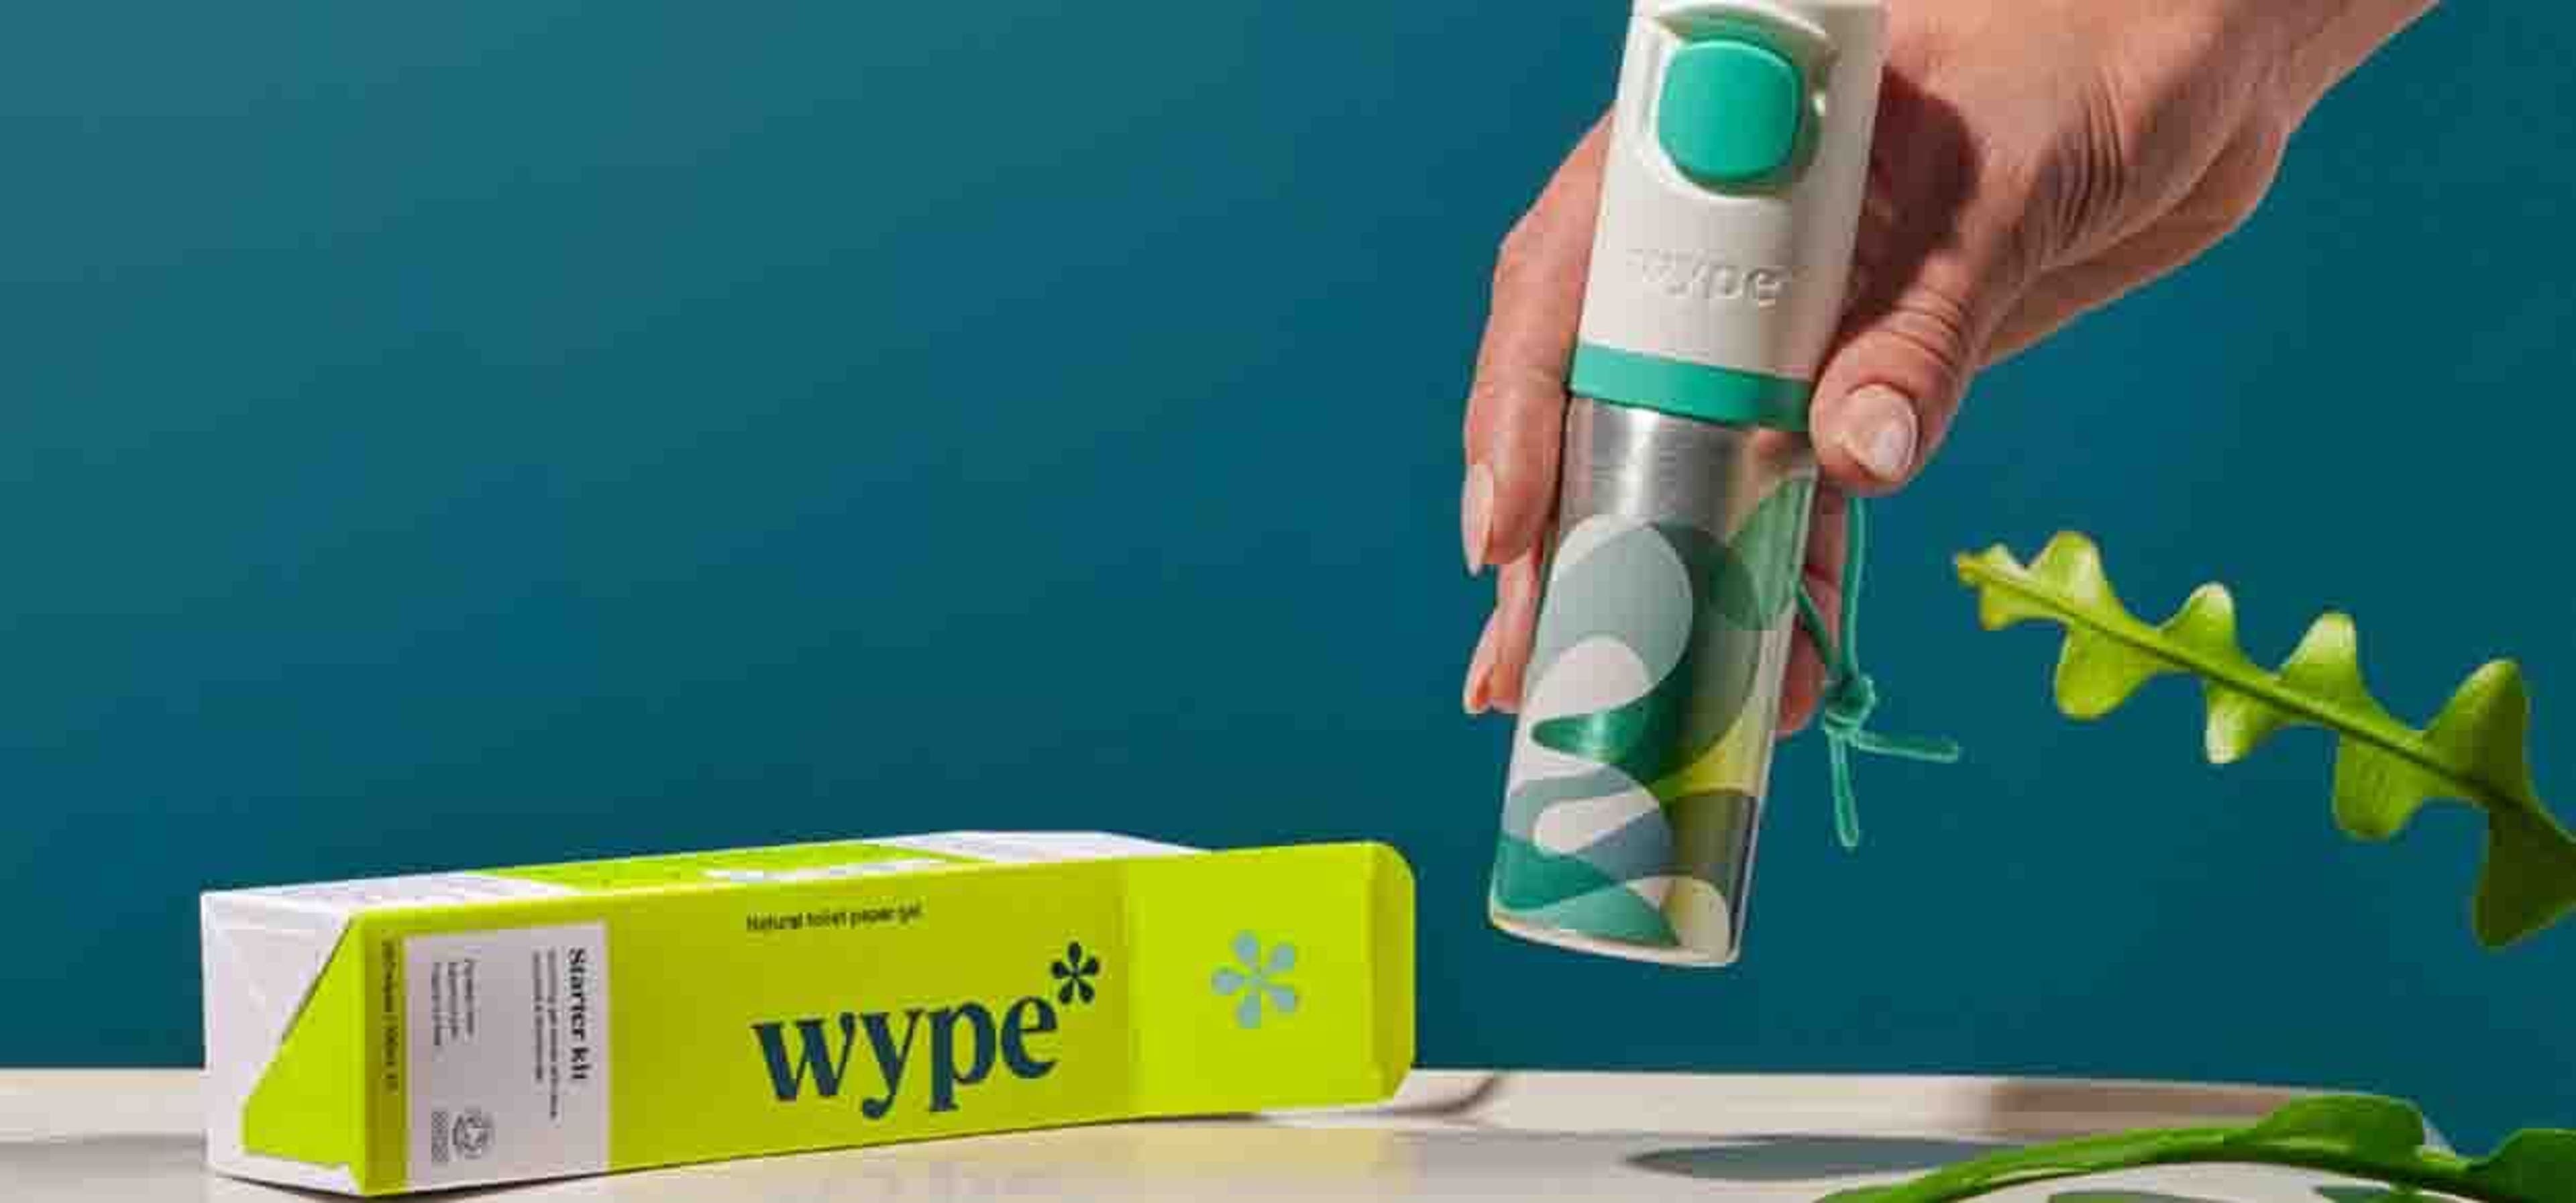  wype cleaning hygiene  